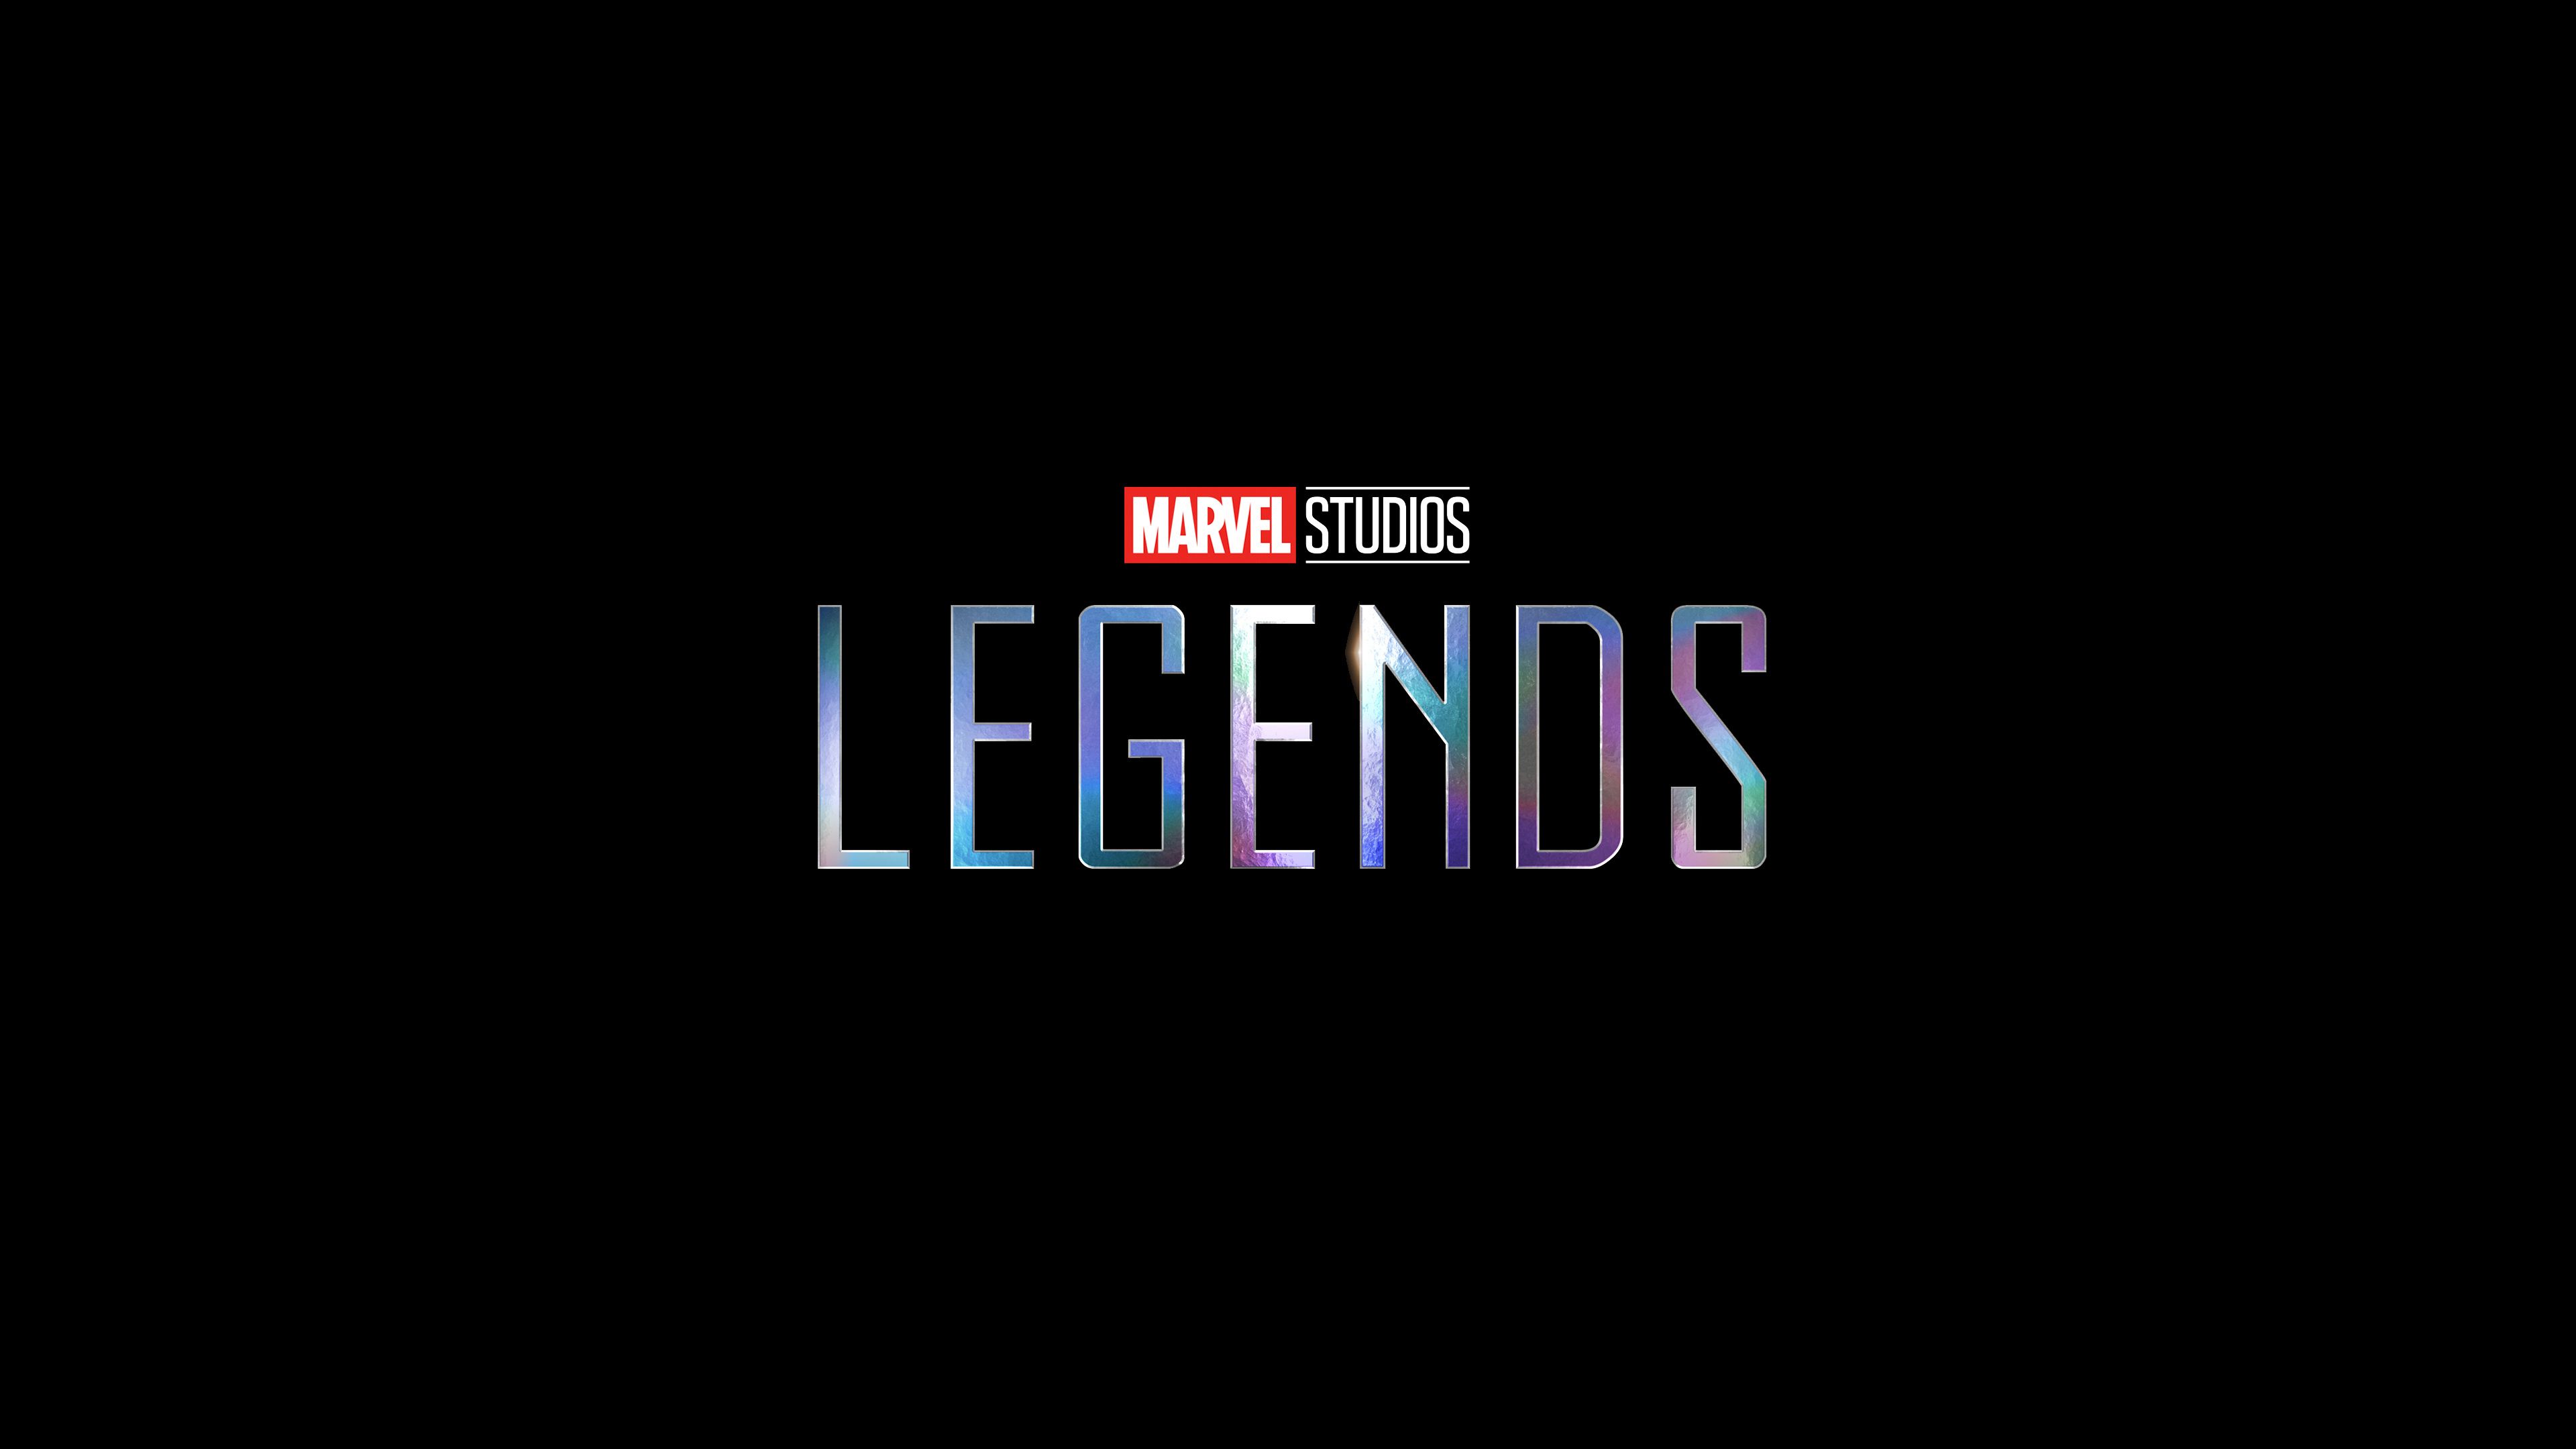 Marvel Studios Legends 2021, HD Tv Shows, 4k Wallpapers, Image, Backgrounds, Photos and Pictures